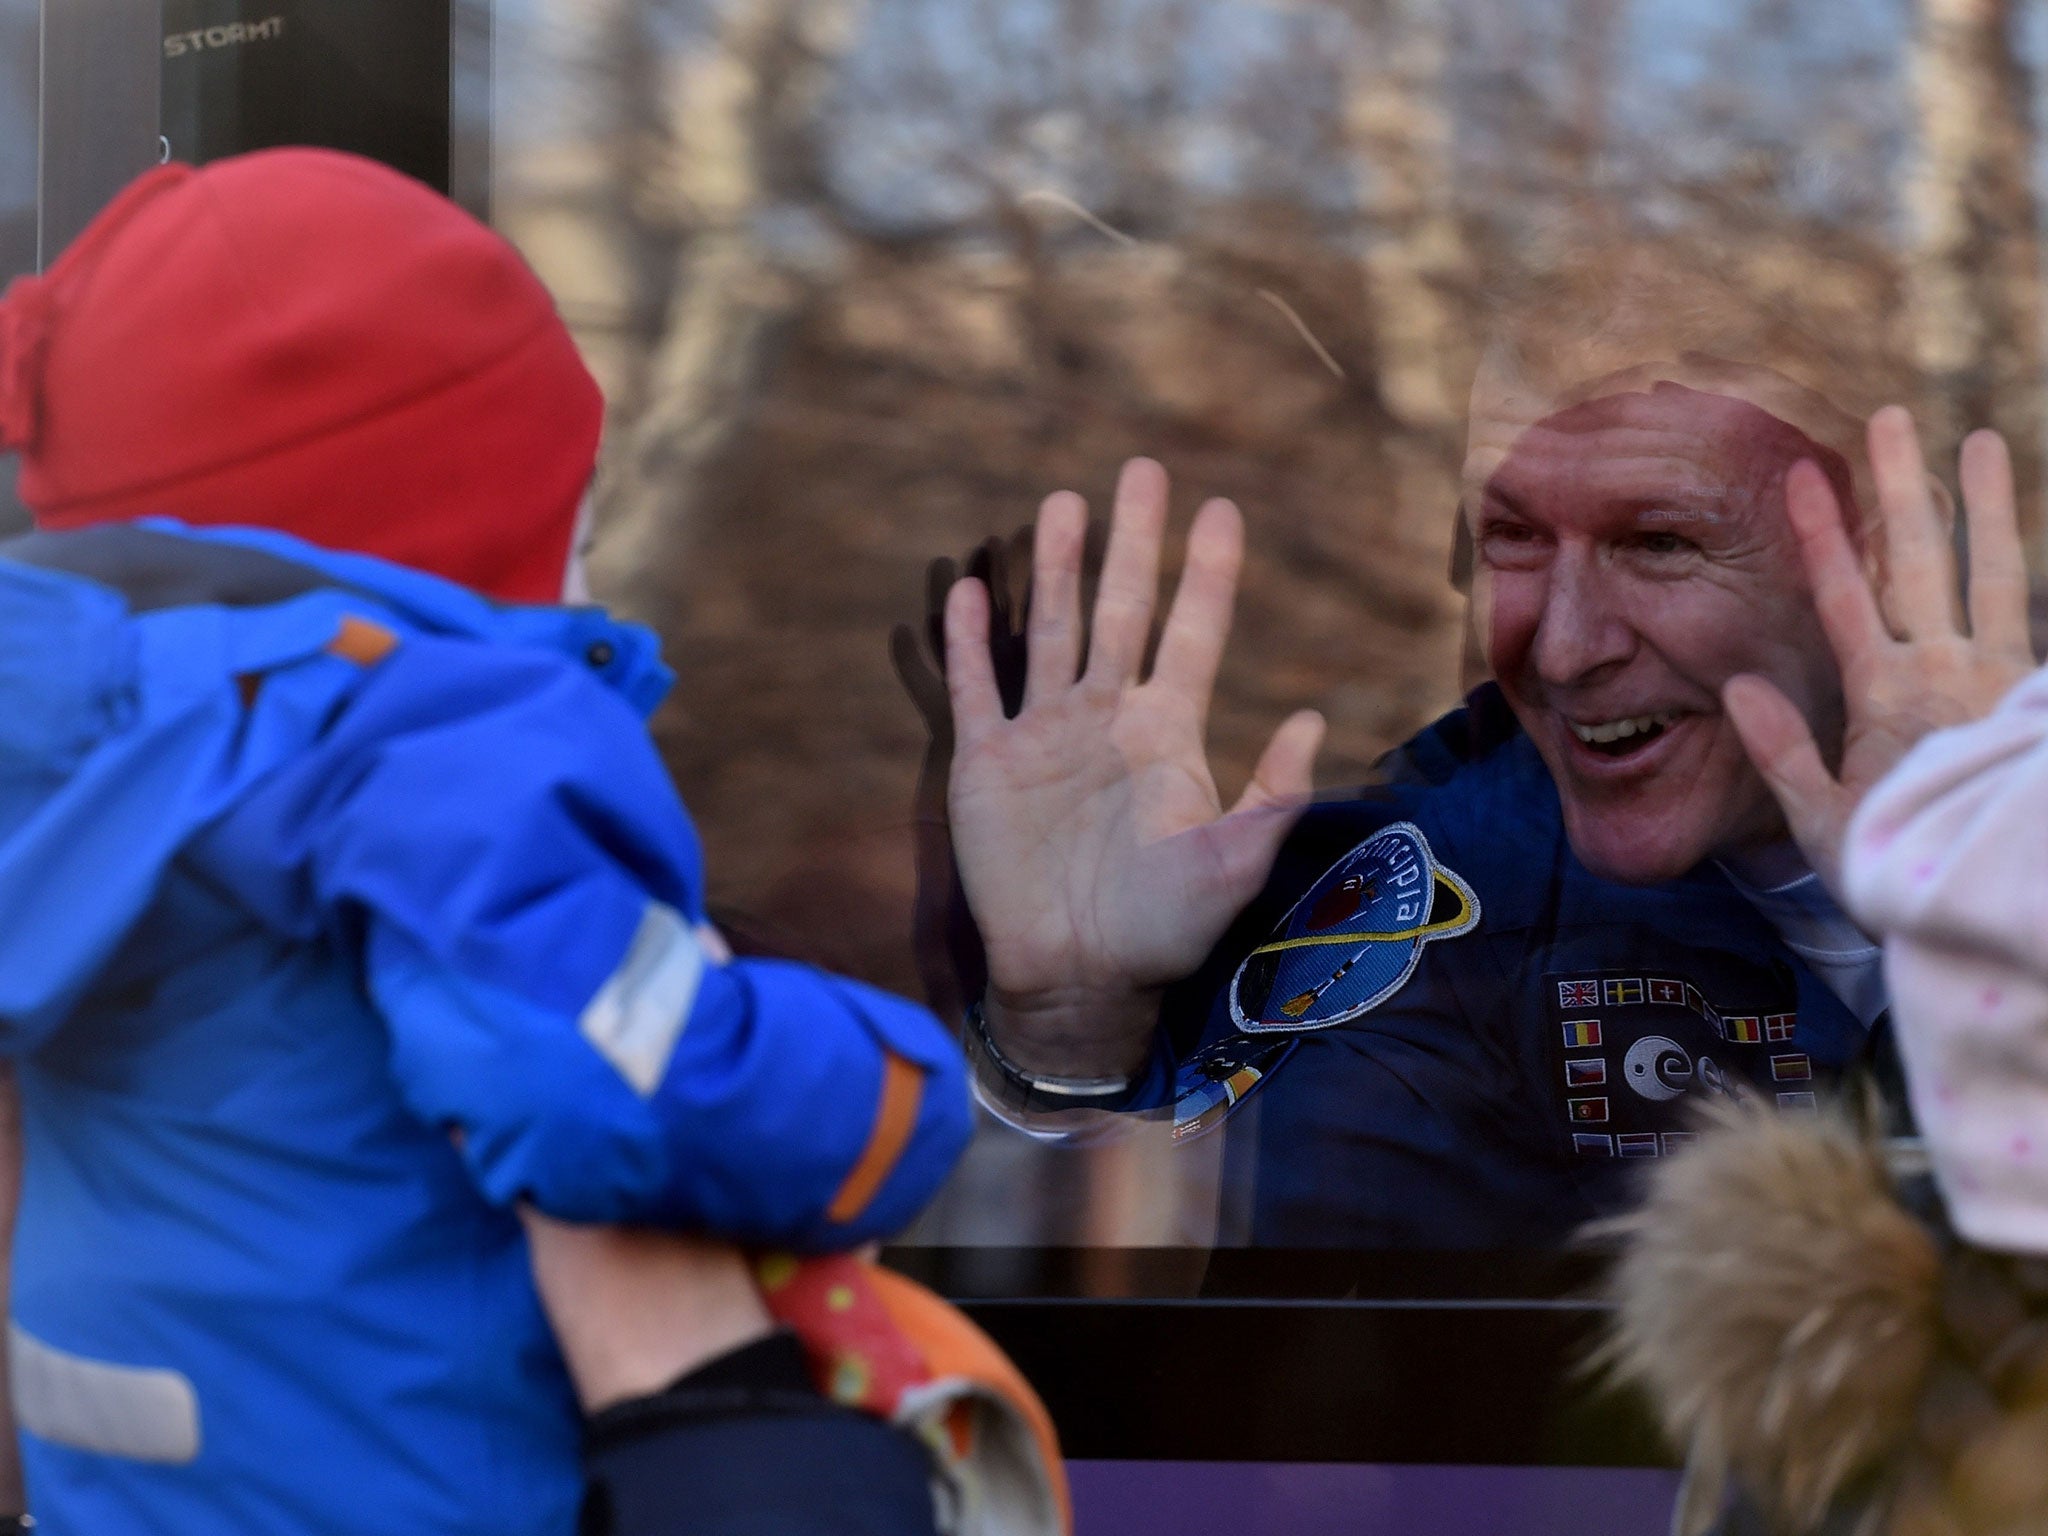 British astronaut Tim Peake waves from a bus during a sending-off ceremony at the Baikonur Cosmodrome on December 15, 2015.